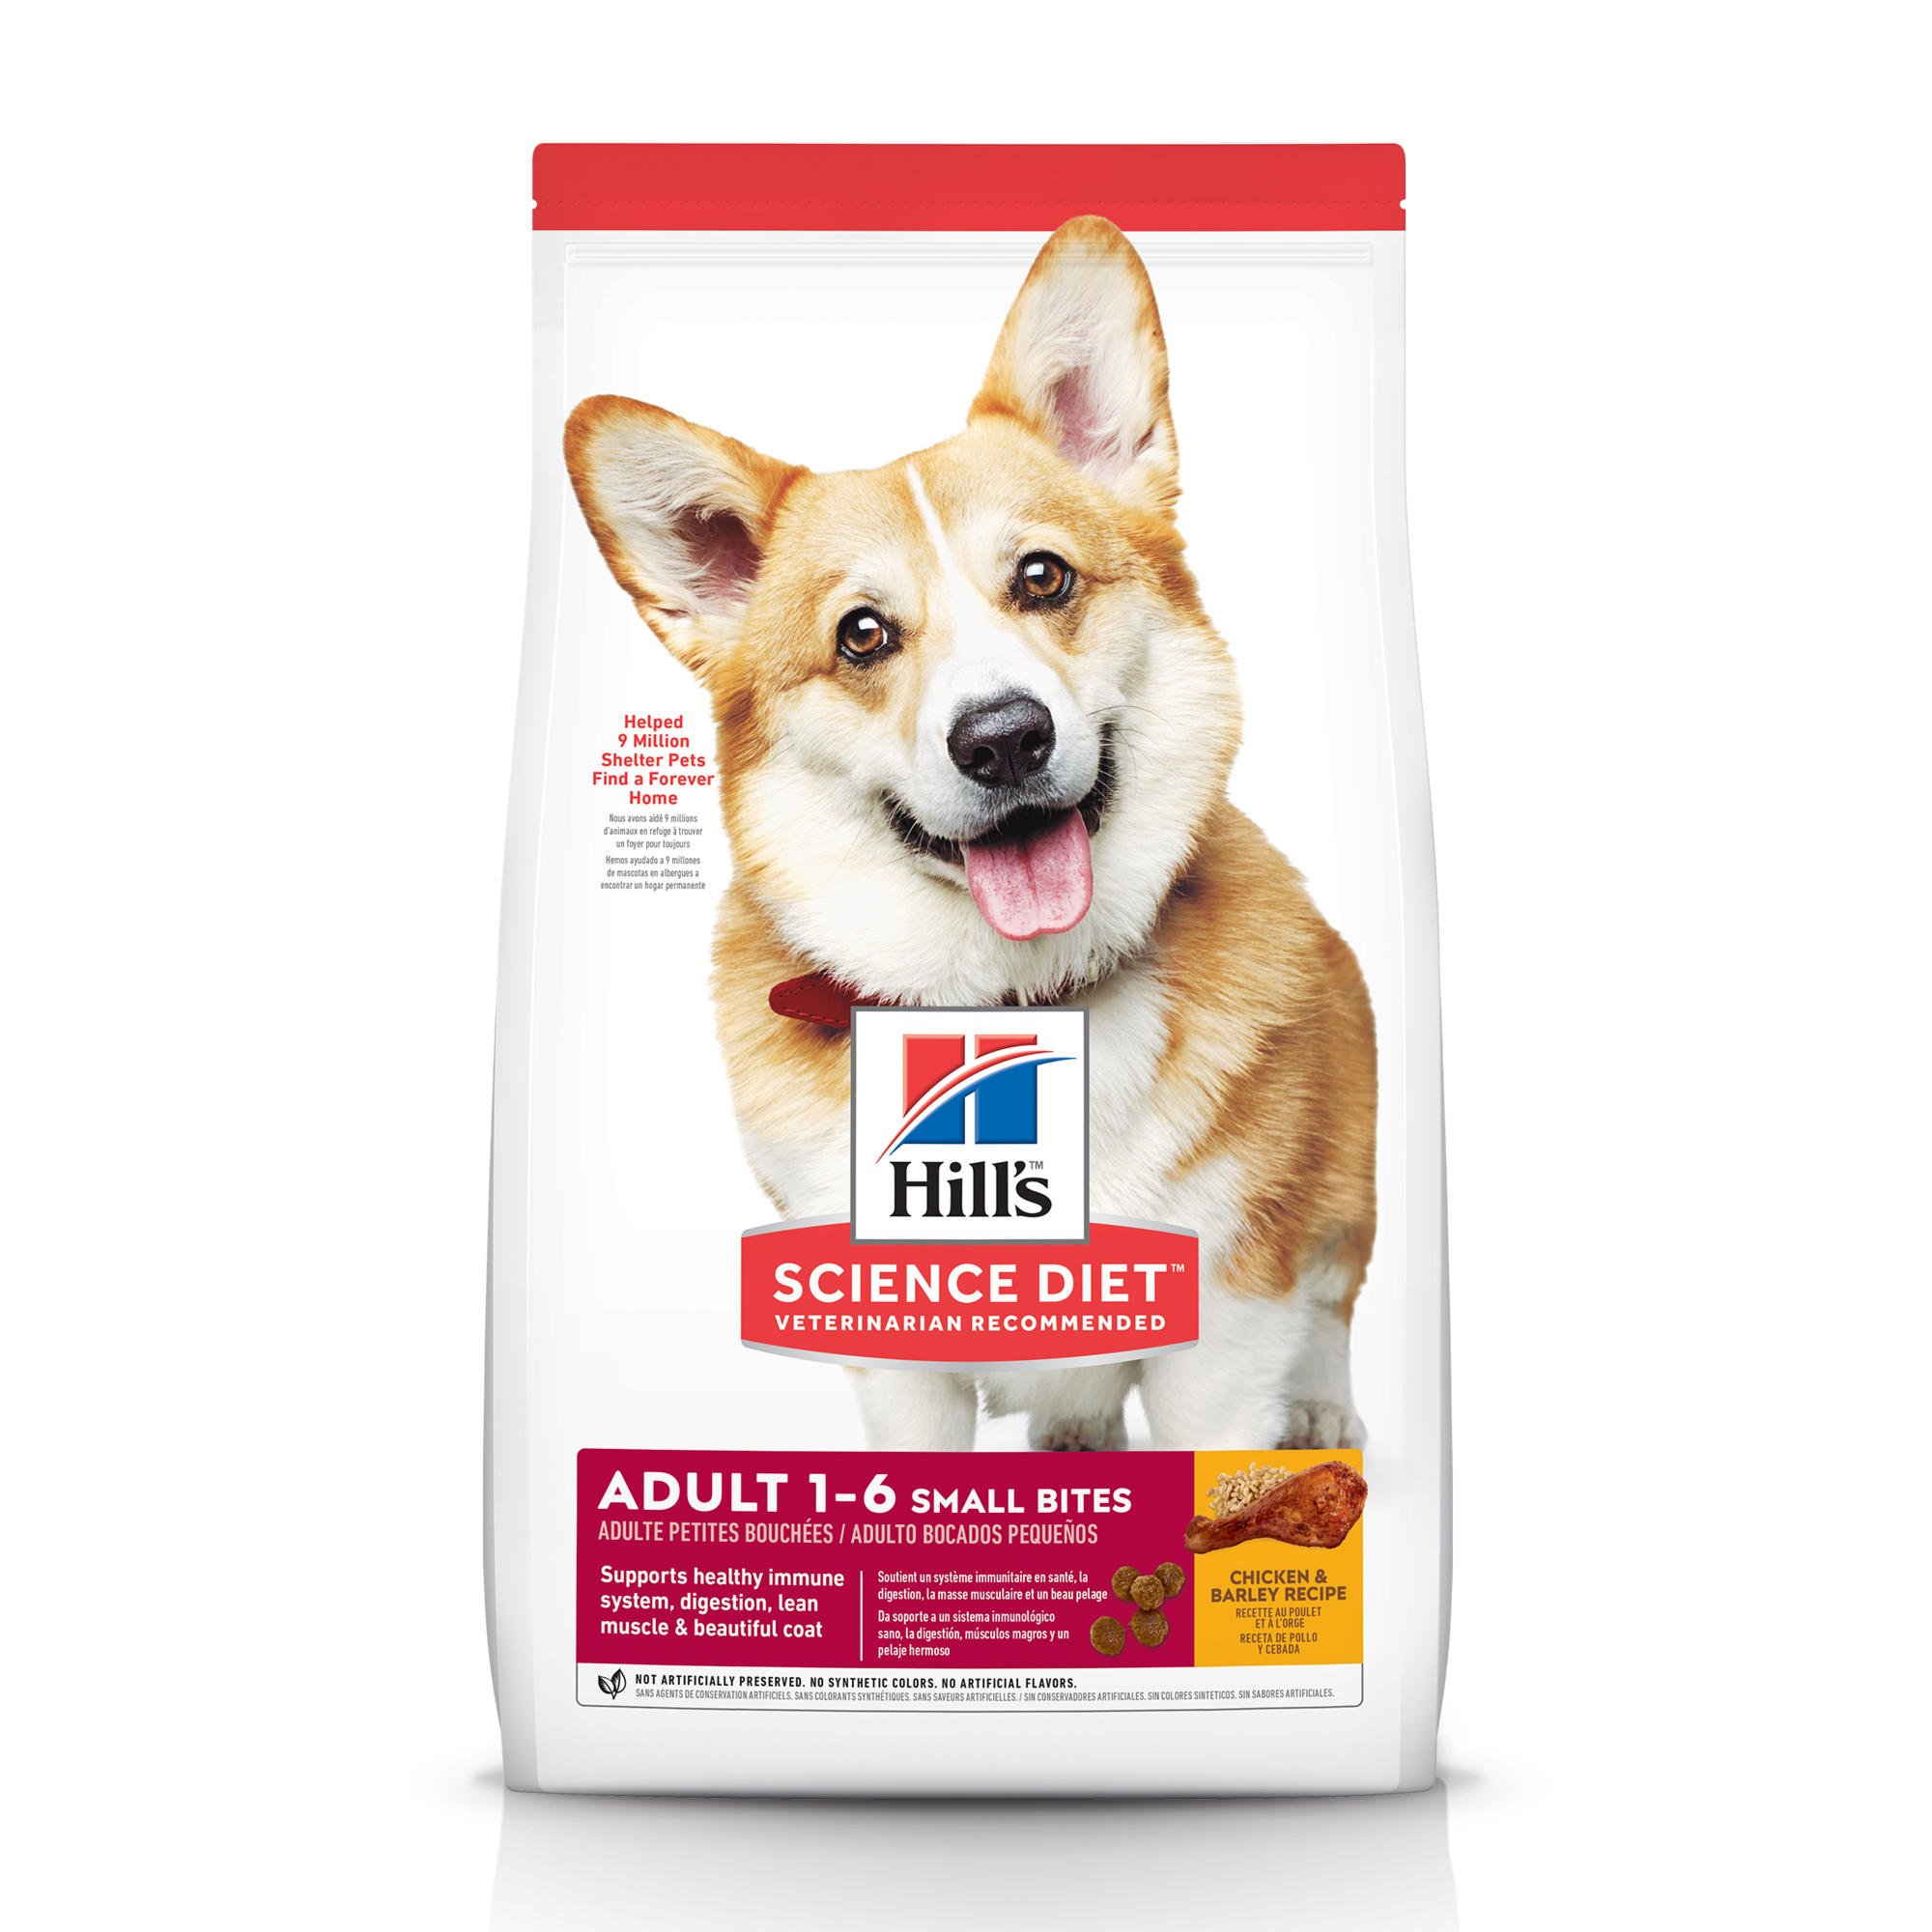 Hill's Science Diet Adult Small Bites with Chicken & Barley Recipe Dry Dog Food, 15 lbs., Bag